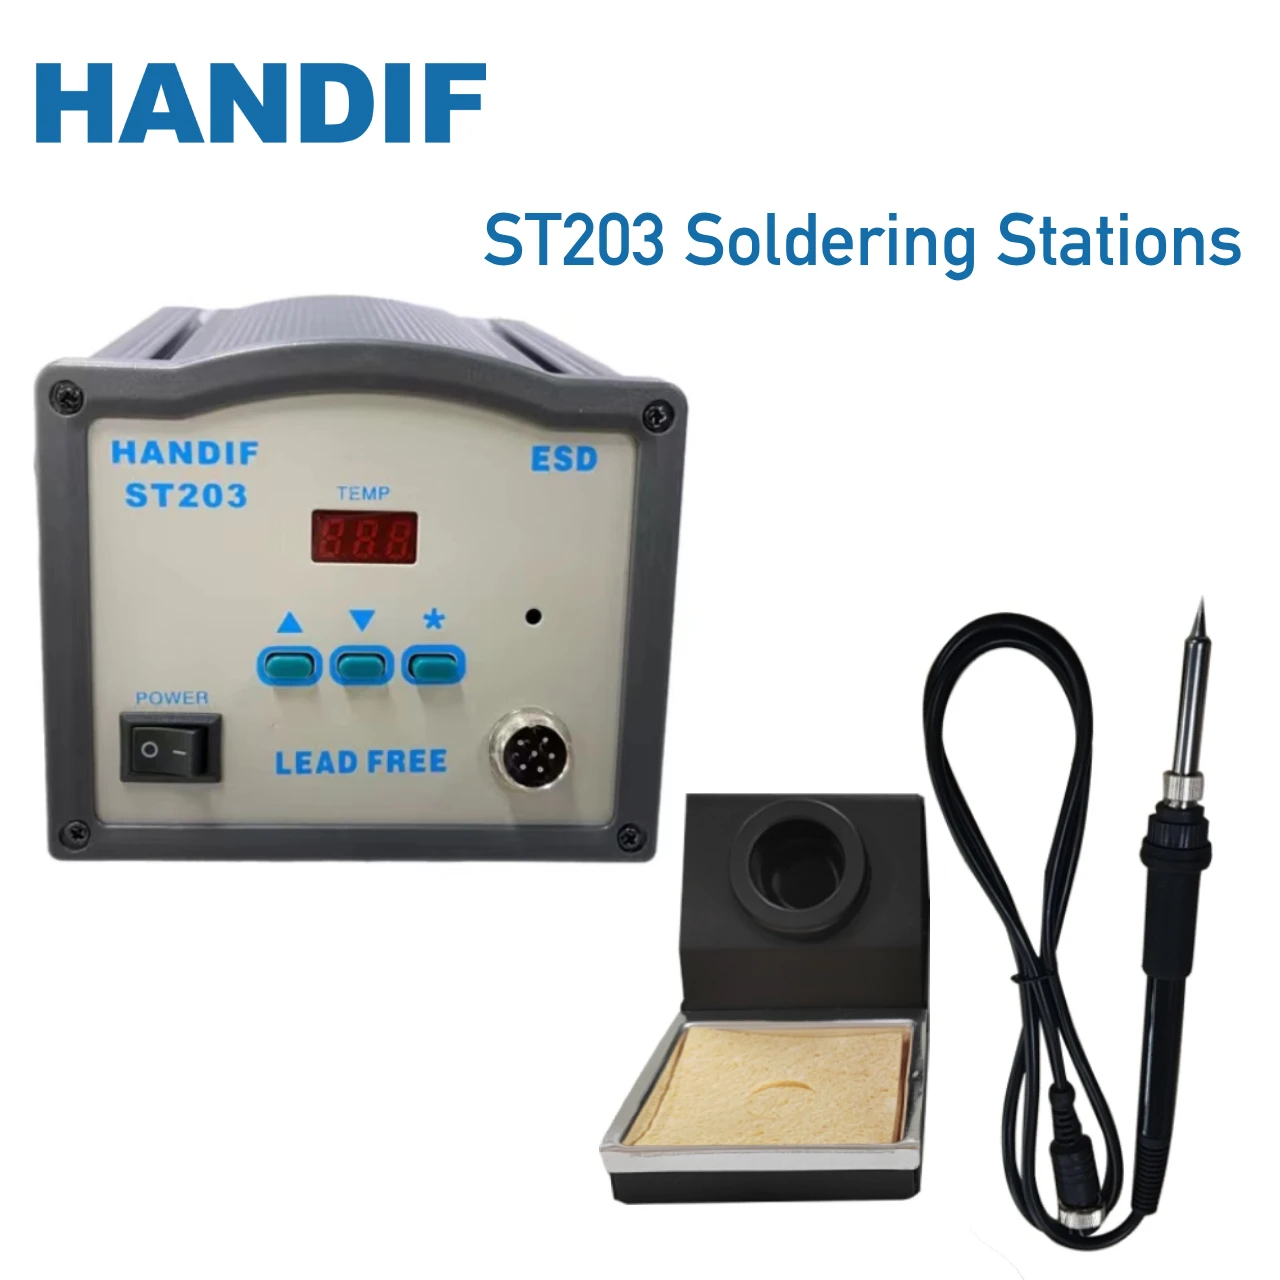 Handif ST 203 Soldering Station 90W Professional Welding Station for Electronic Tools to Repair Cell Phones